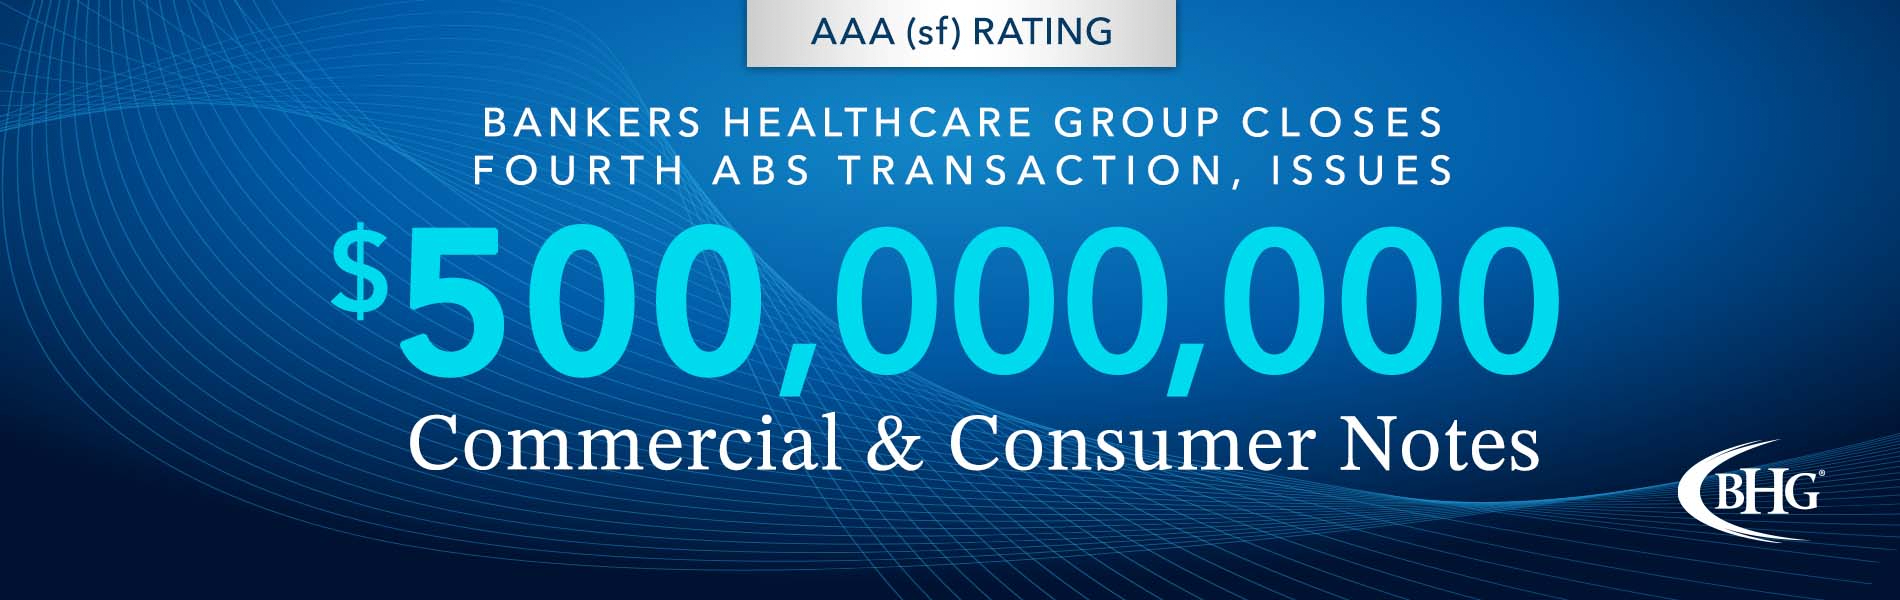 Kroll Bond Rating Agency, LLC (KBRA) issued a rating of ‘AAA (sf)’ for BHG 2022-A’s Class A Notes, in line with the senior tranche rating on BHG’s preceding transaction, BHG 2021-B, which closed in September of last year. In January, KBRA published upgraded ratings for two classes of notes in BHG’s inaugural transaction, BHG 2020-A, with the Class A tranche being revised to ‘AAA (sf)’.